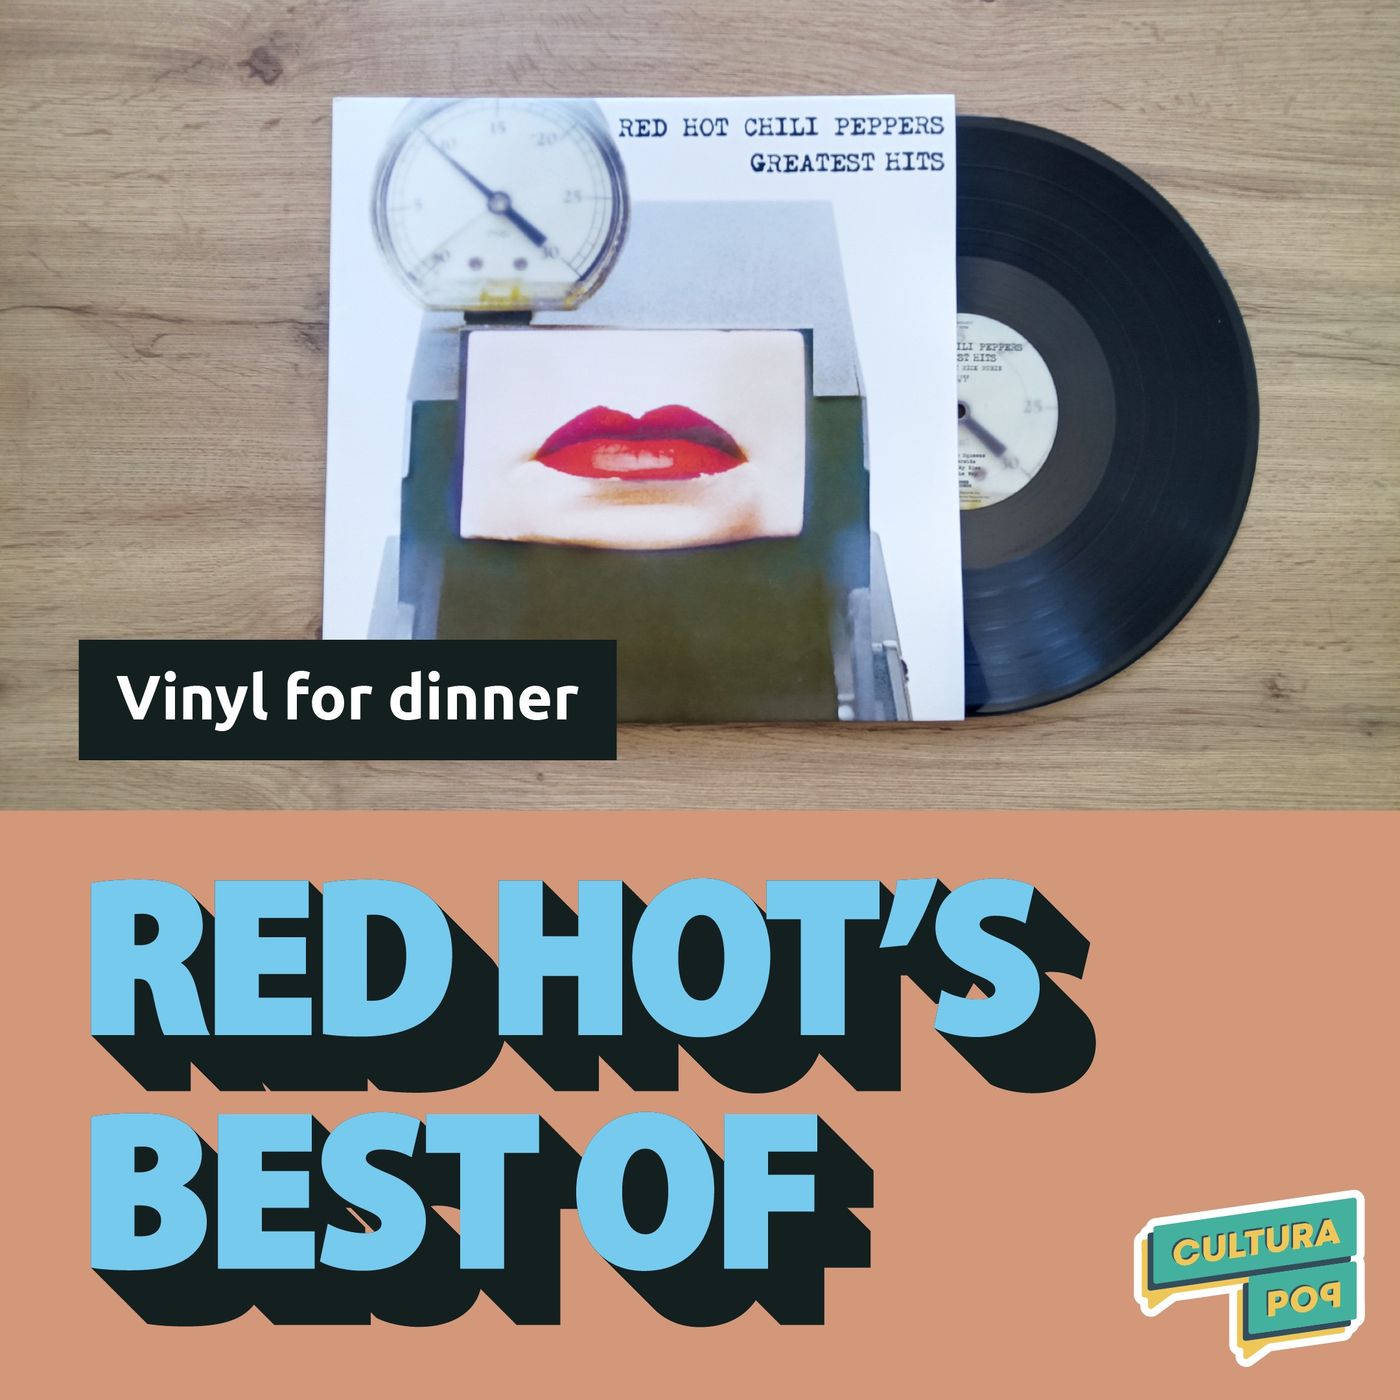 Trascrizione 4. Red Hot Chili Peppers Greatest Hits - Vinyl for dinner